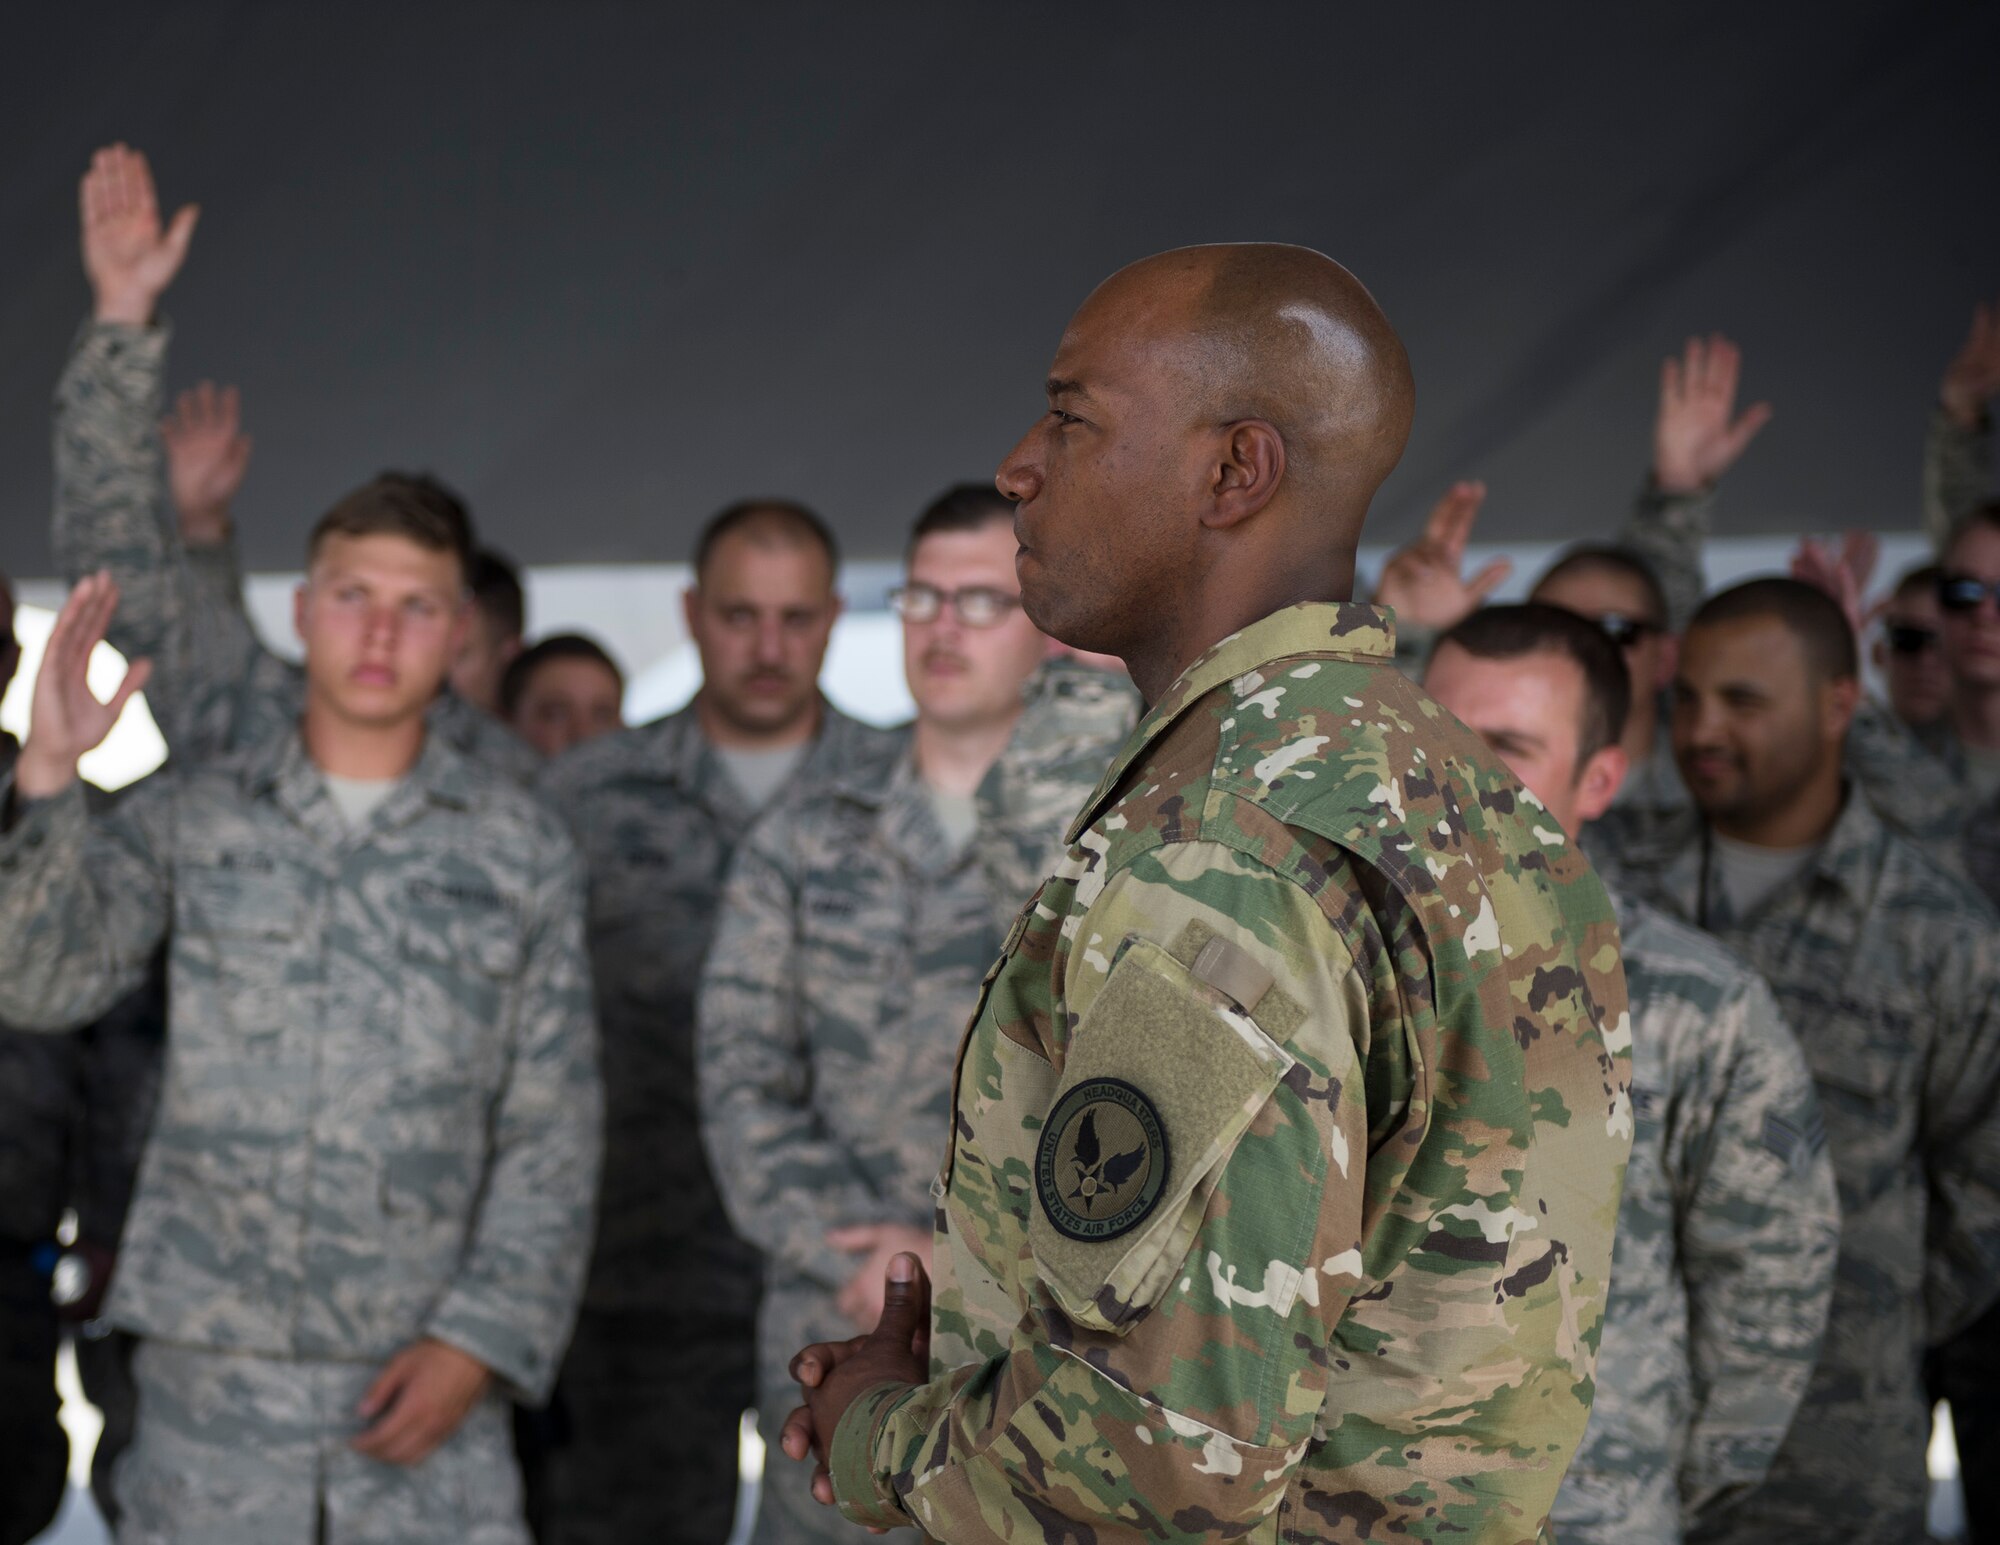 Chief Master Sgt. of the Air Force Kaleth O. Wright takes questions from maintainers and munitions Airmen from the 379th Expeditionary Maintenance Group at Al Udeid Air Base, Qatar, April 12, 2017. Wright was accompanied by U.S. Air Force Vice Chief of Staff Gen. Stephen W. Wilson and made several stops to units across the wing, providing an opportunity for Airmen to speak about their duties and ask questions they had. (U.S. Air Force photo by Tech. Sgt. Amy M. Lovgren)